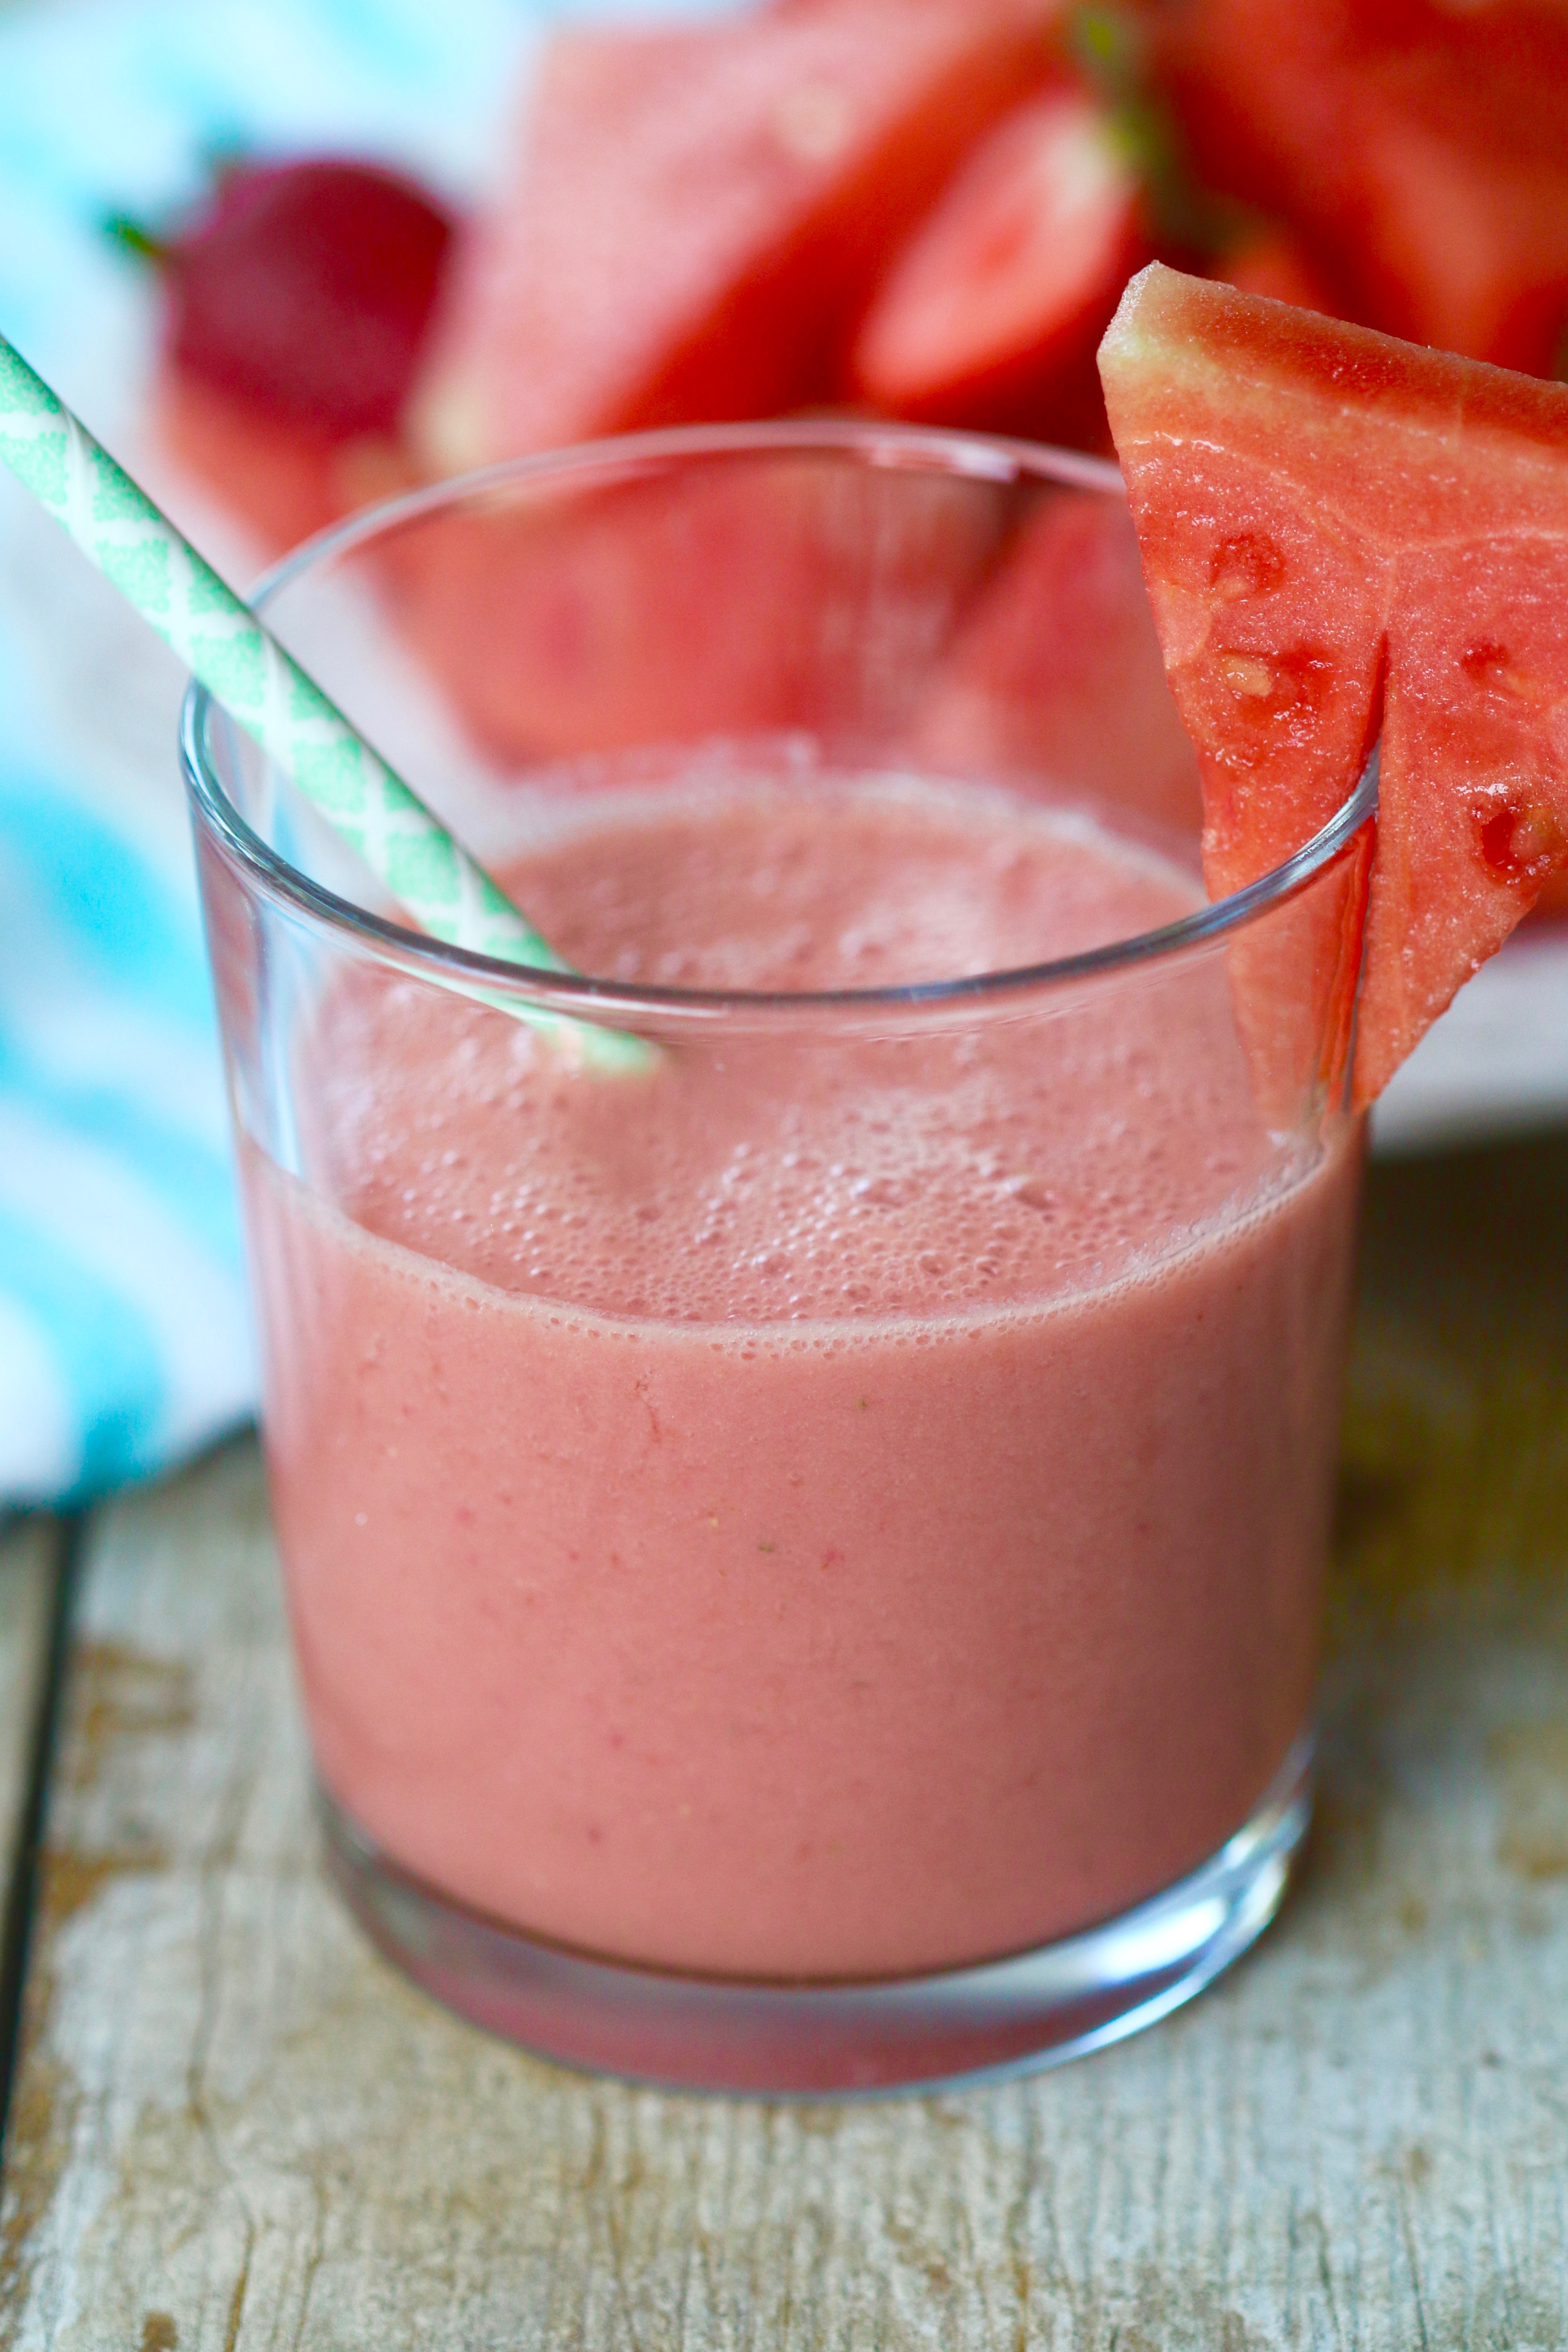 You will make the summer heat more bearable when you stay hydrated with a Watermelon Strawberry Breakfast Smoothie in the morning.